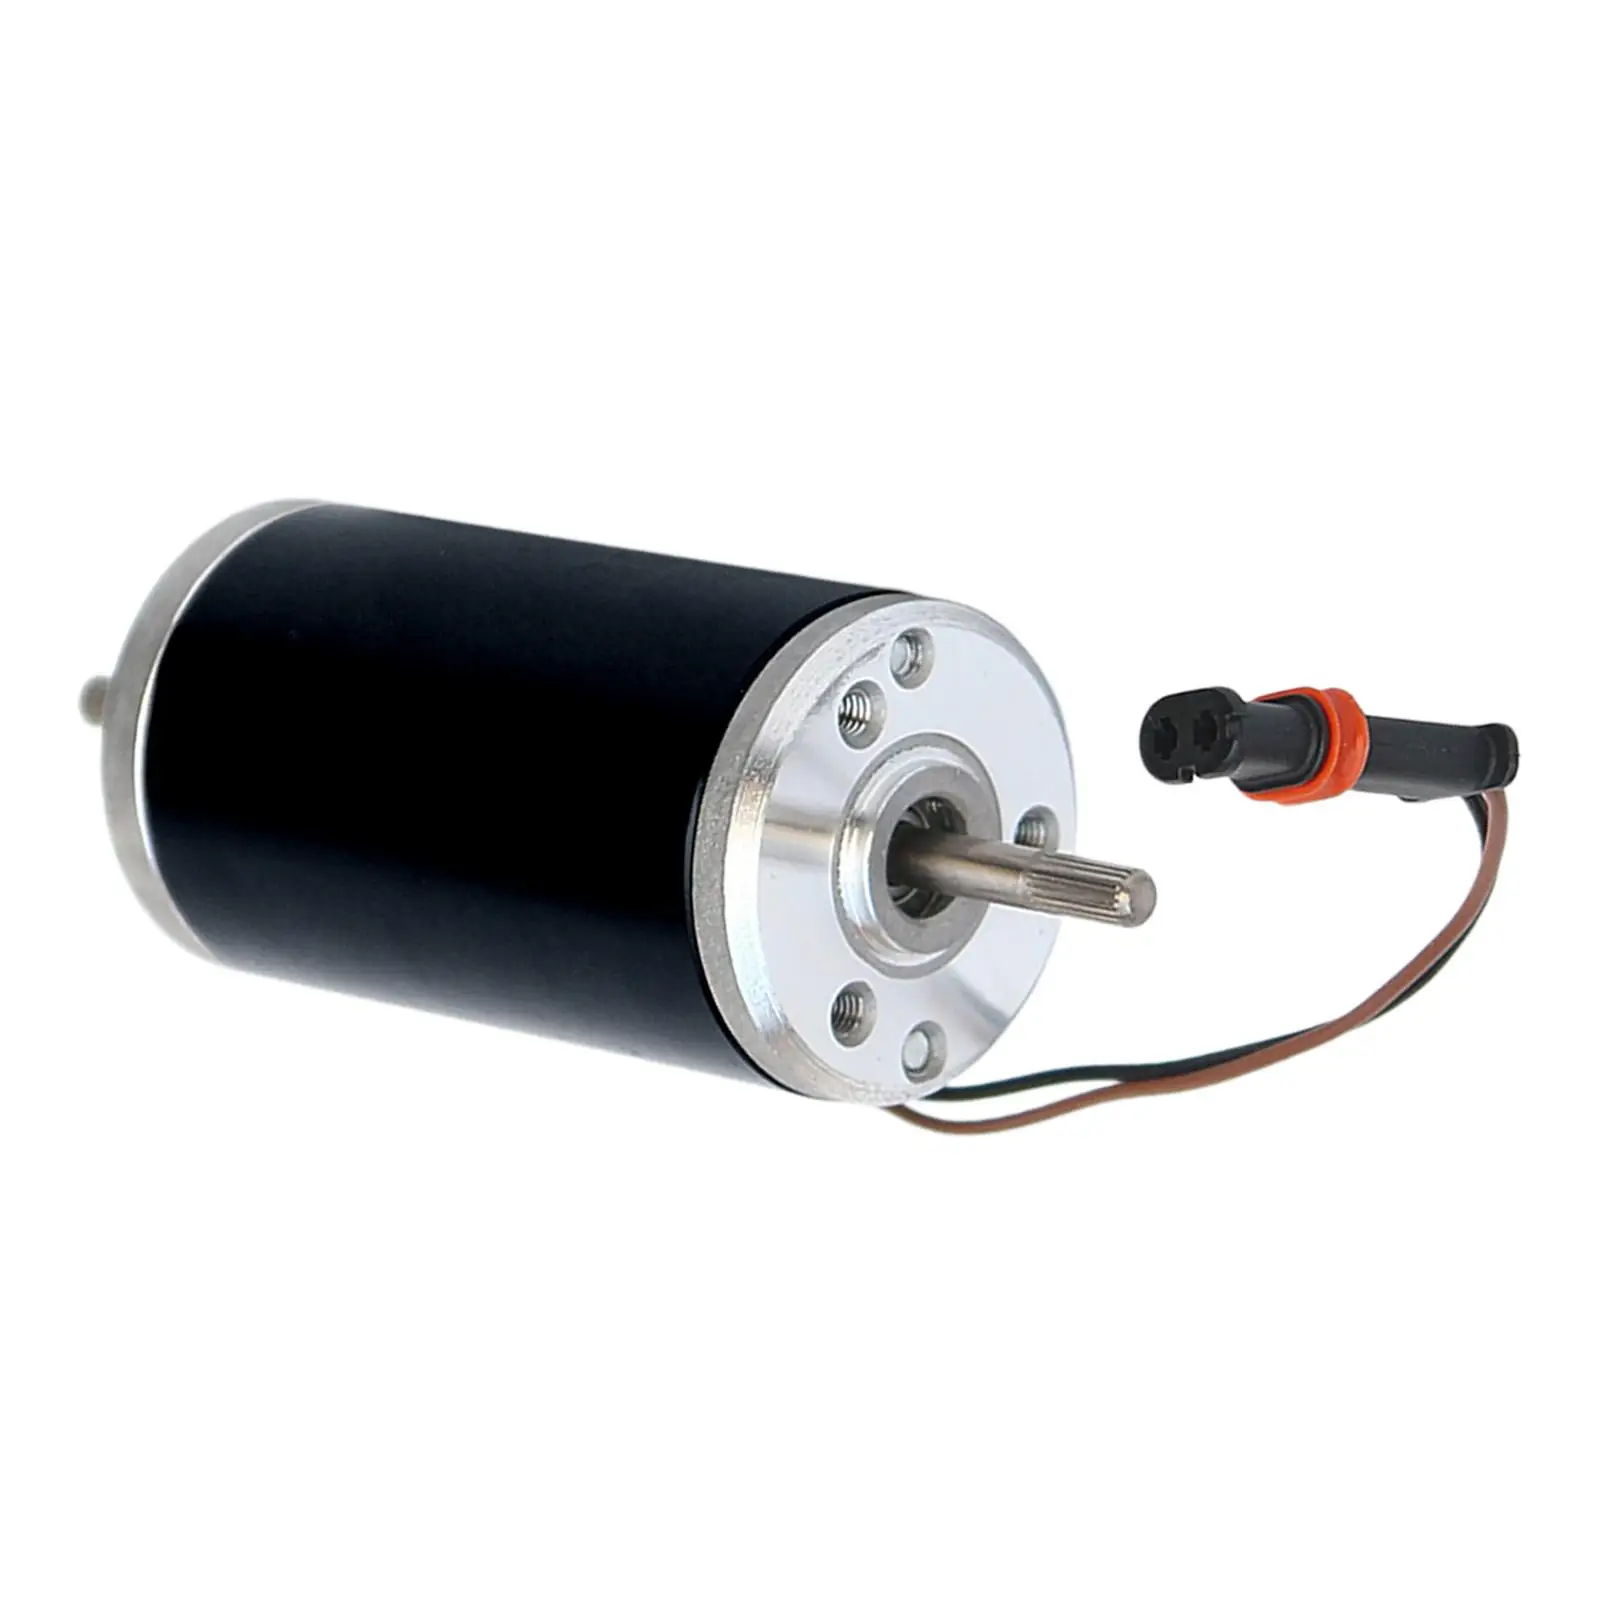 Parking Heater Blower Motor Stable Speed Low Power Consumption 12V 2.2A Copper Cores Mute for Airtronic D4 12V